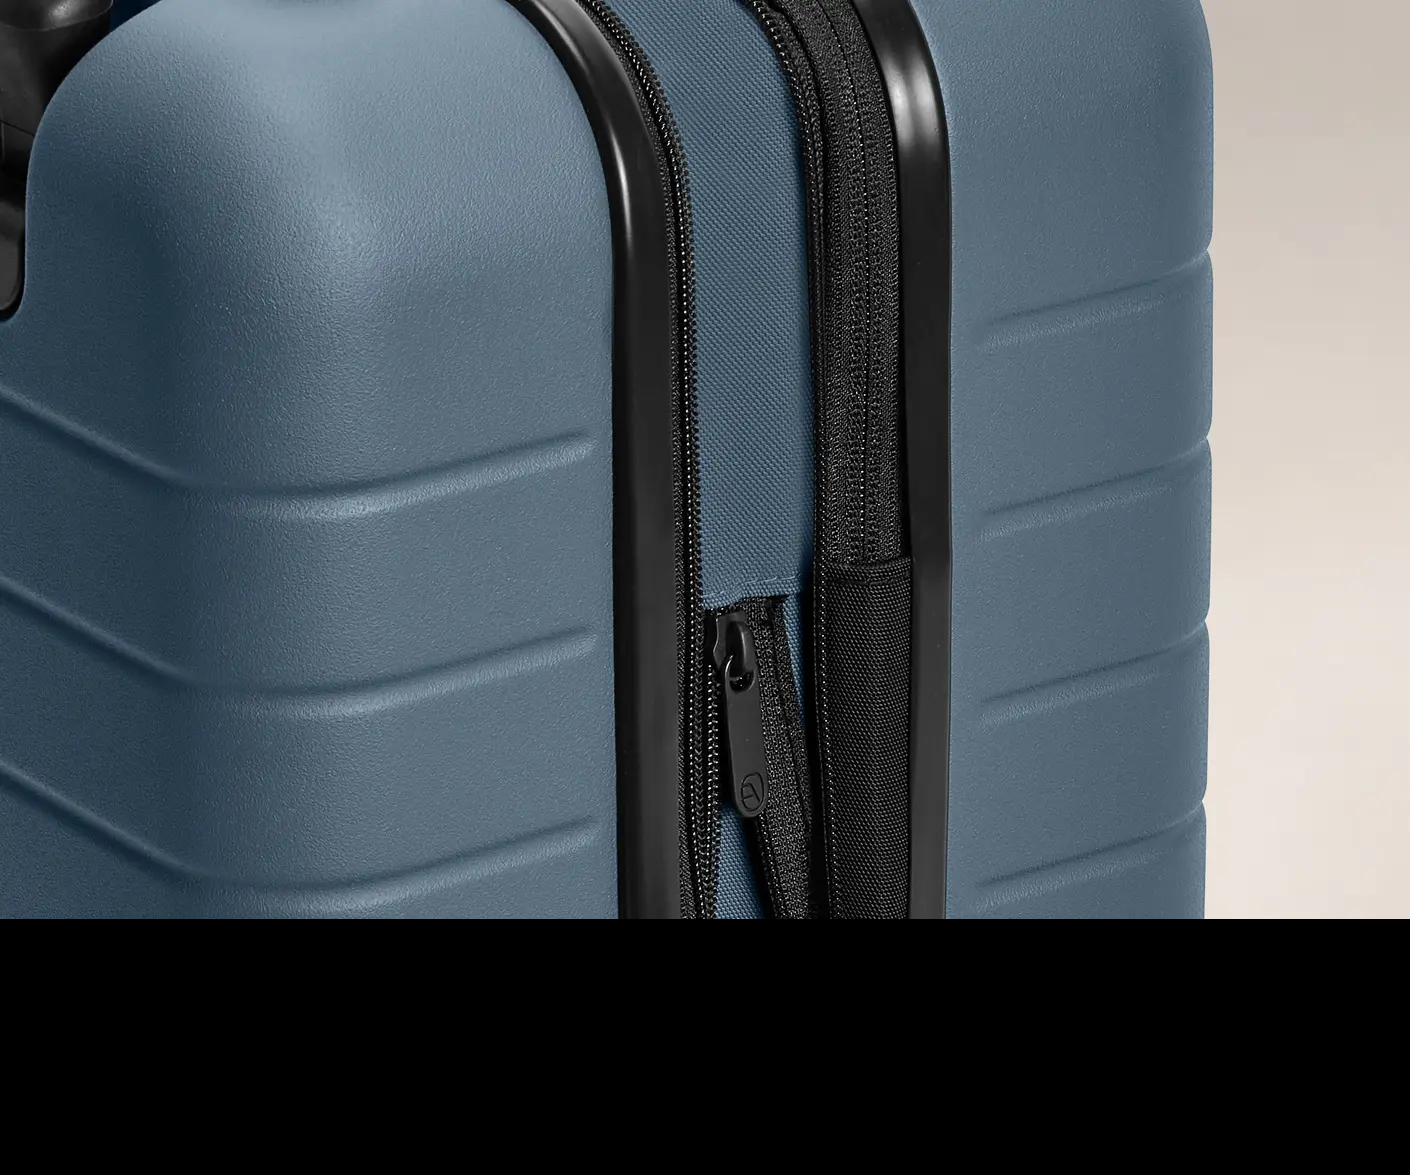 The Bigger Carry-On Flex AWAY